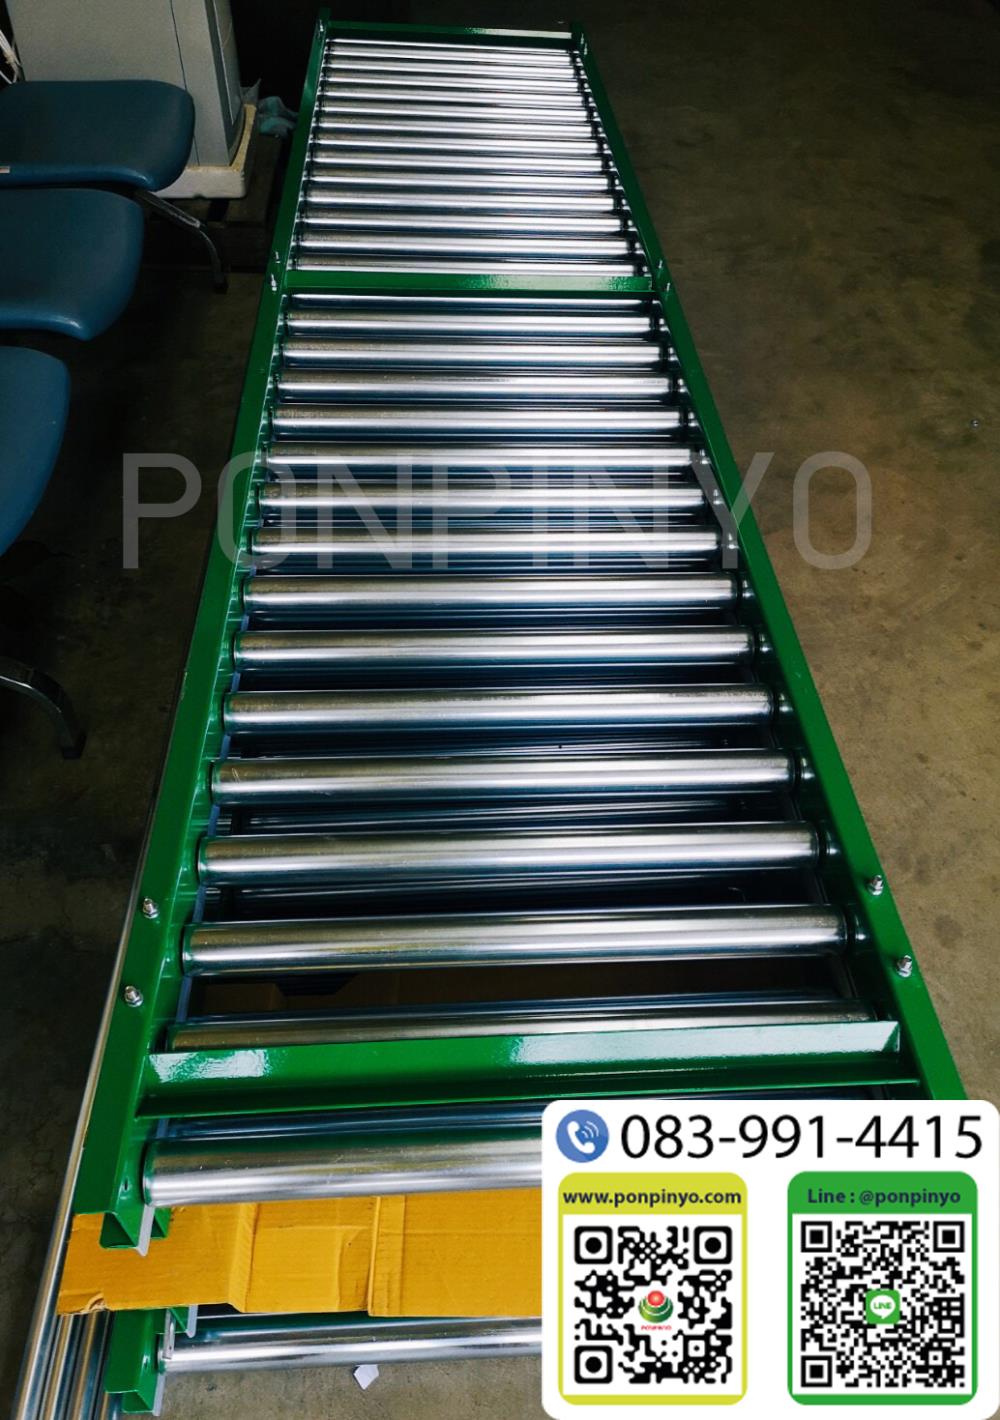 Conveyor Roller ลูกกลิ้งลำเลียง,Conveyor Roller ลูกกลิ้งลำเลียง คอนเวเยอร์ ,,Machinery and Process Equipment/Bearings/Roller